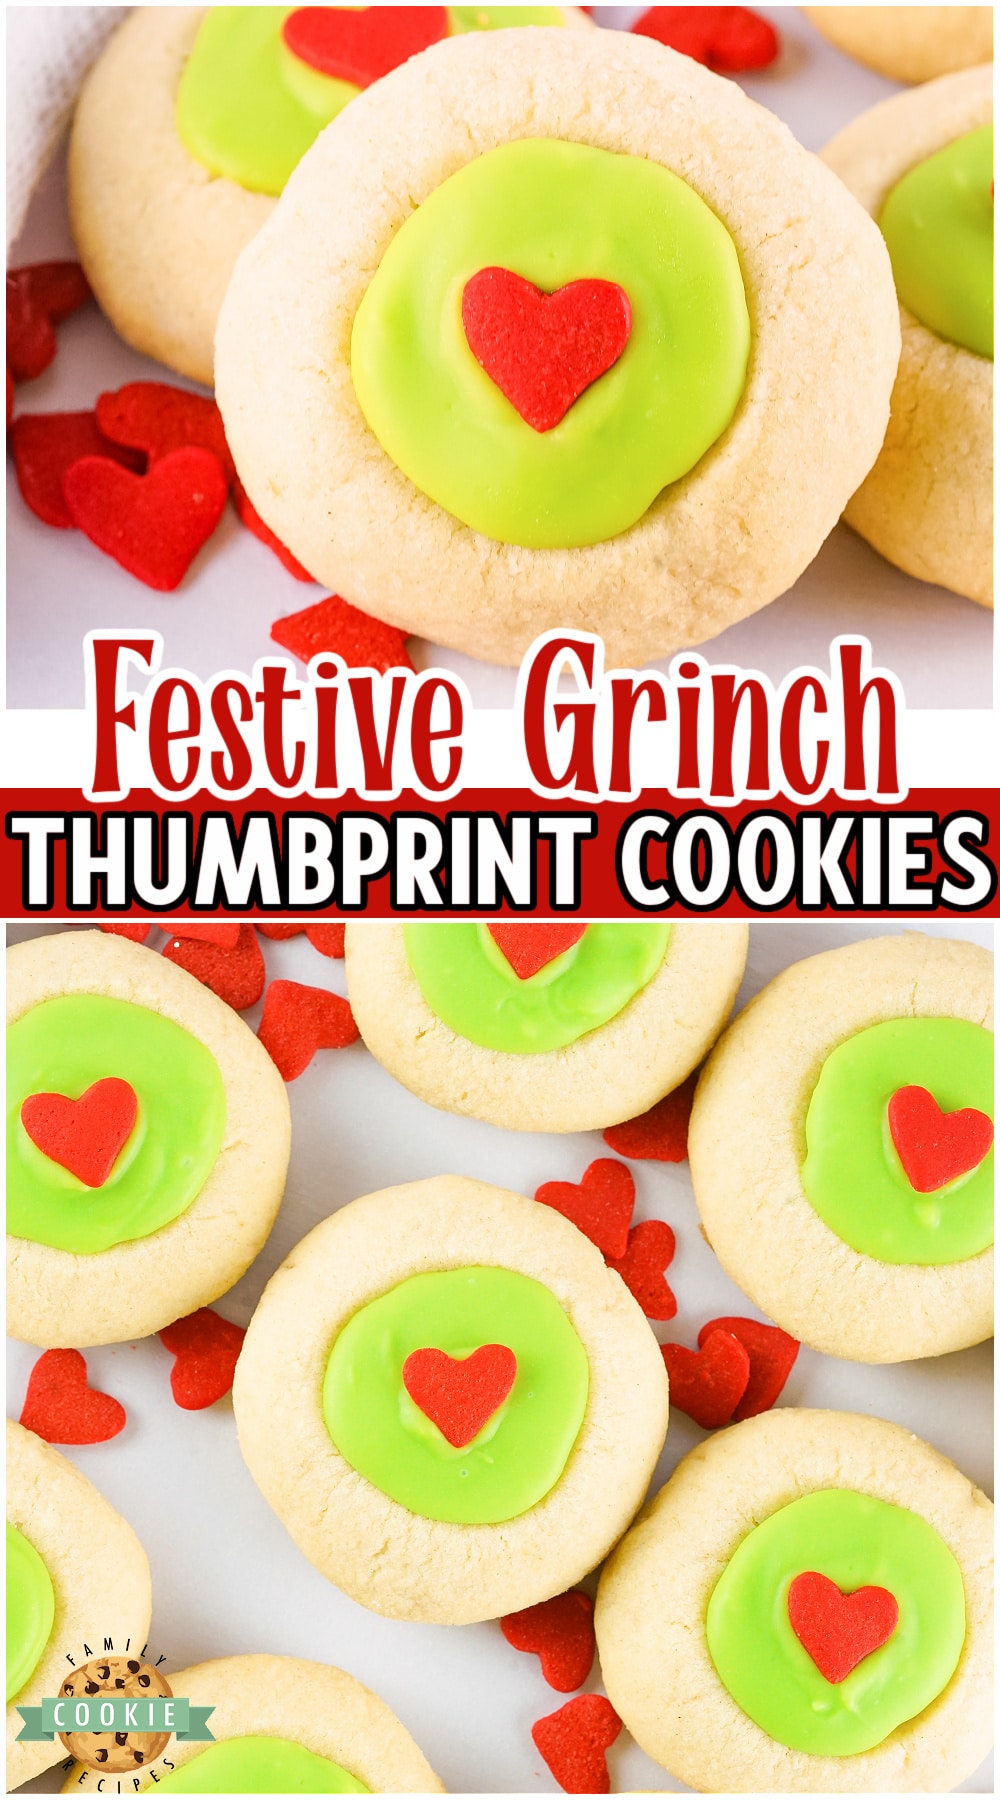 The Grinch may have stolen Christmas but these cookies will steal your hearts! Fun & Festive Grinch Thumbprint Cookies made with green chocolate filling & topped with a red heart sprinkle! 